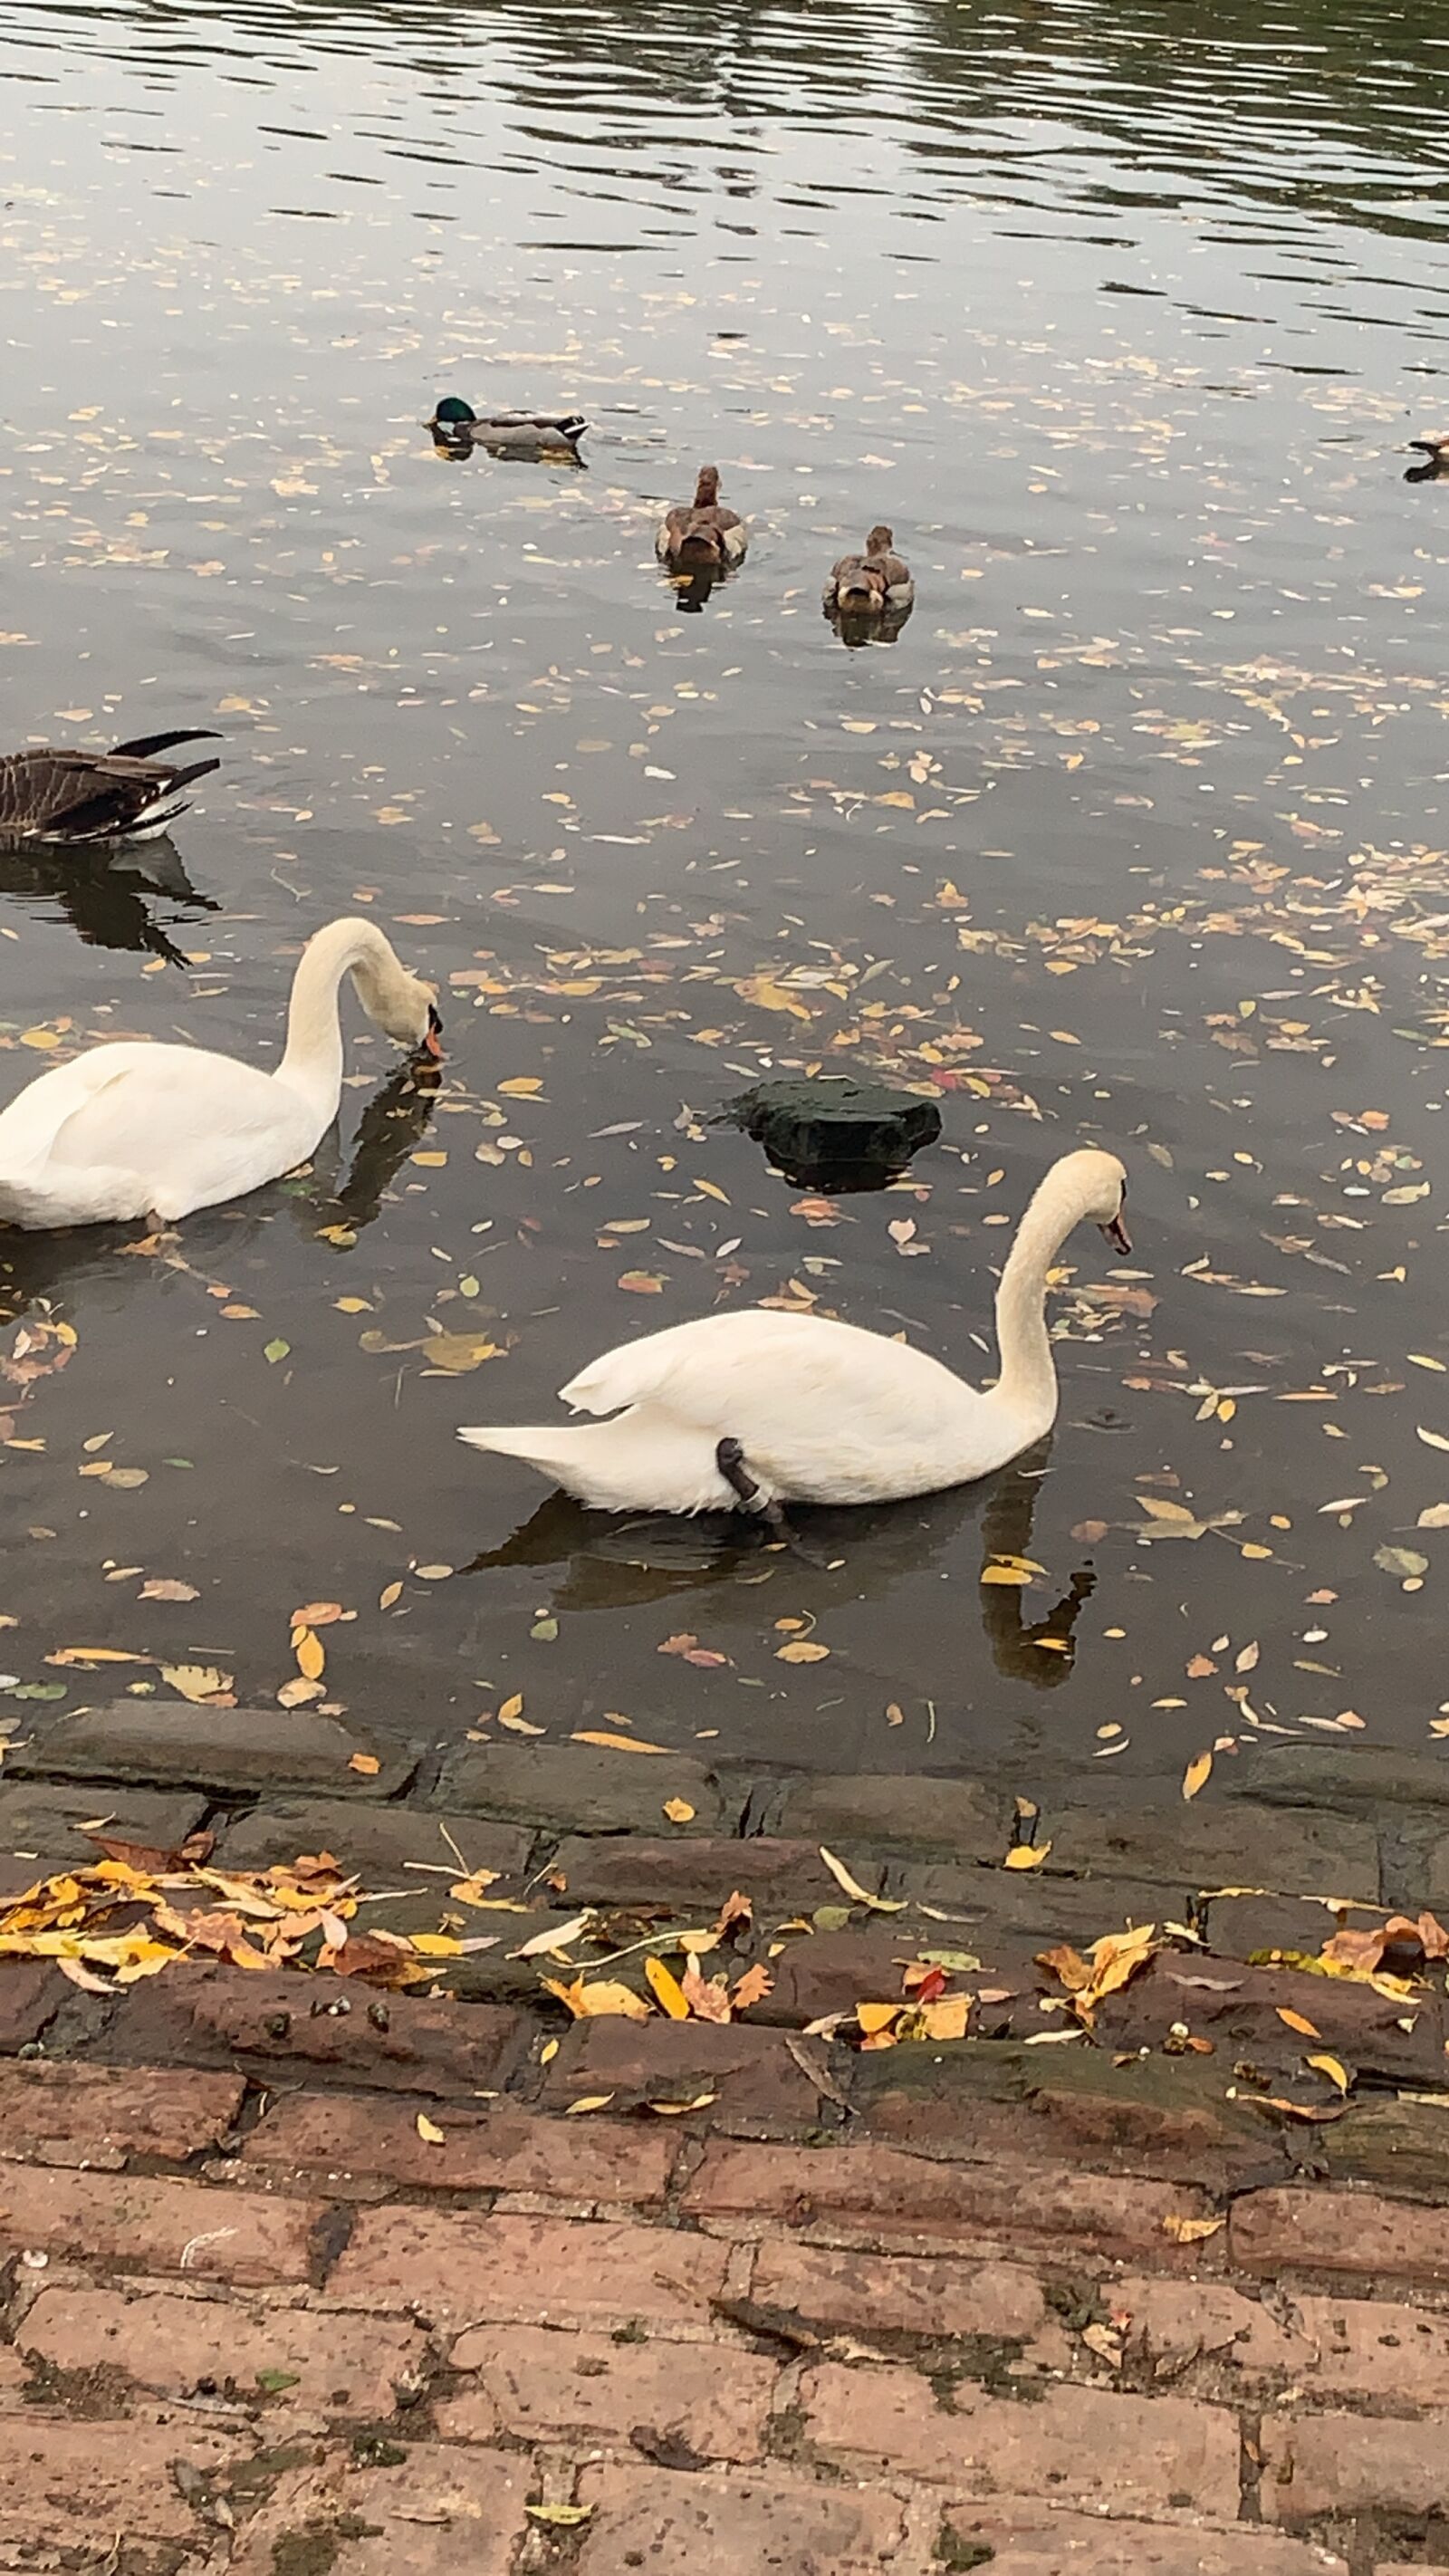 Apple iPhone XS Max sample photo. Swan, river, germany photography